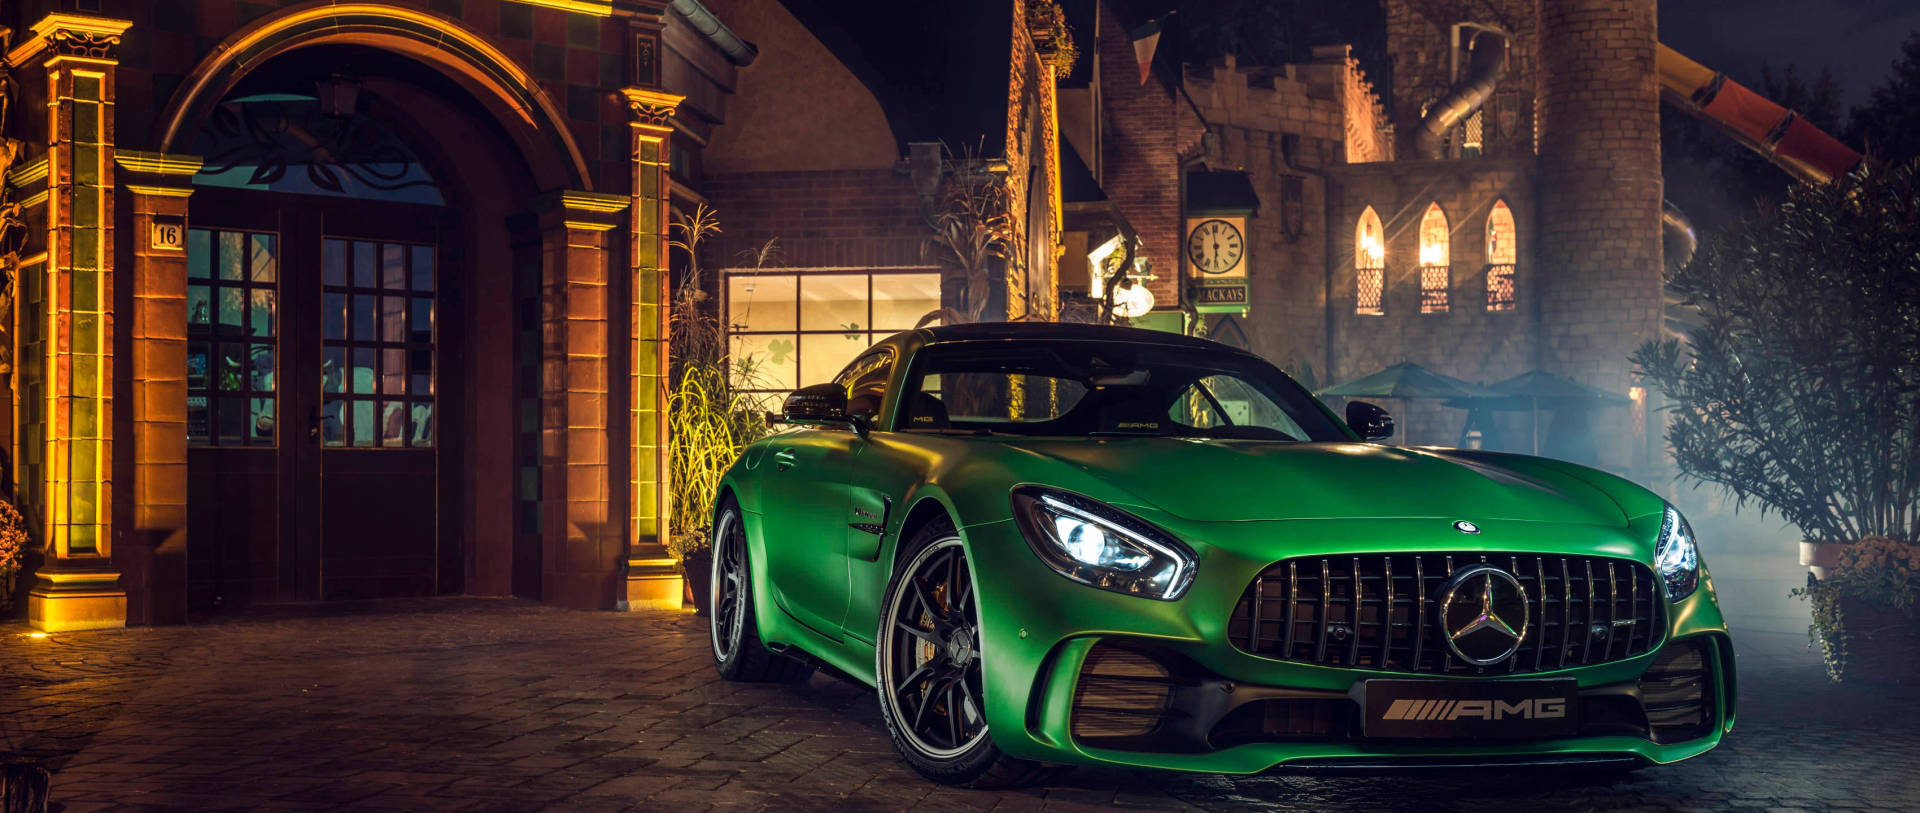 Green AMG Parked Outside The Door Wallpaper